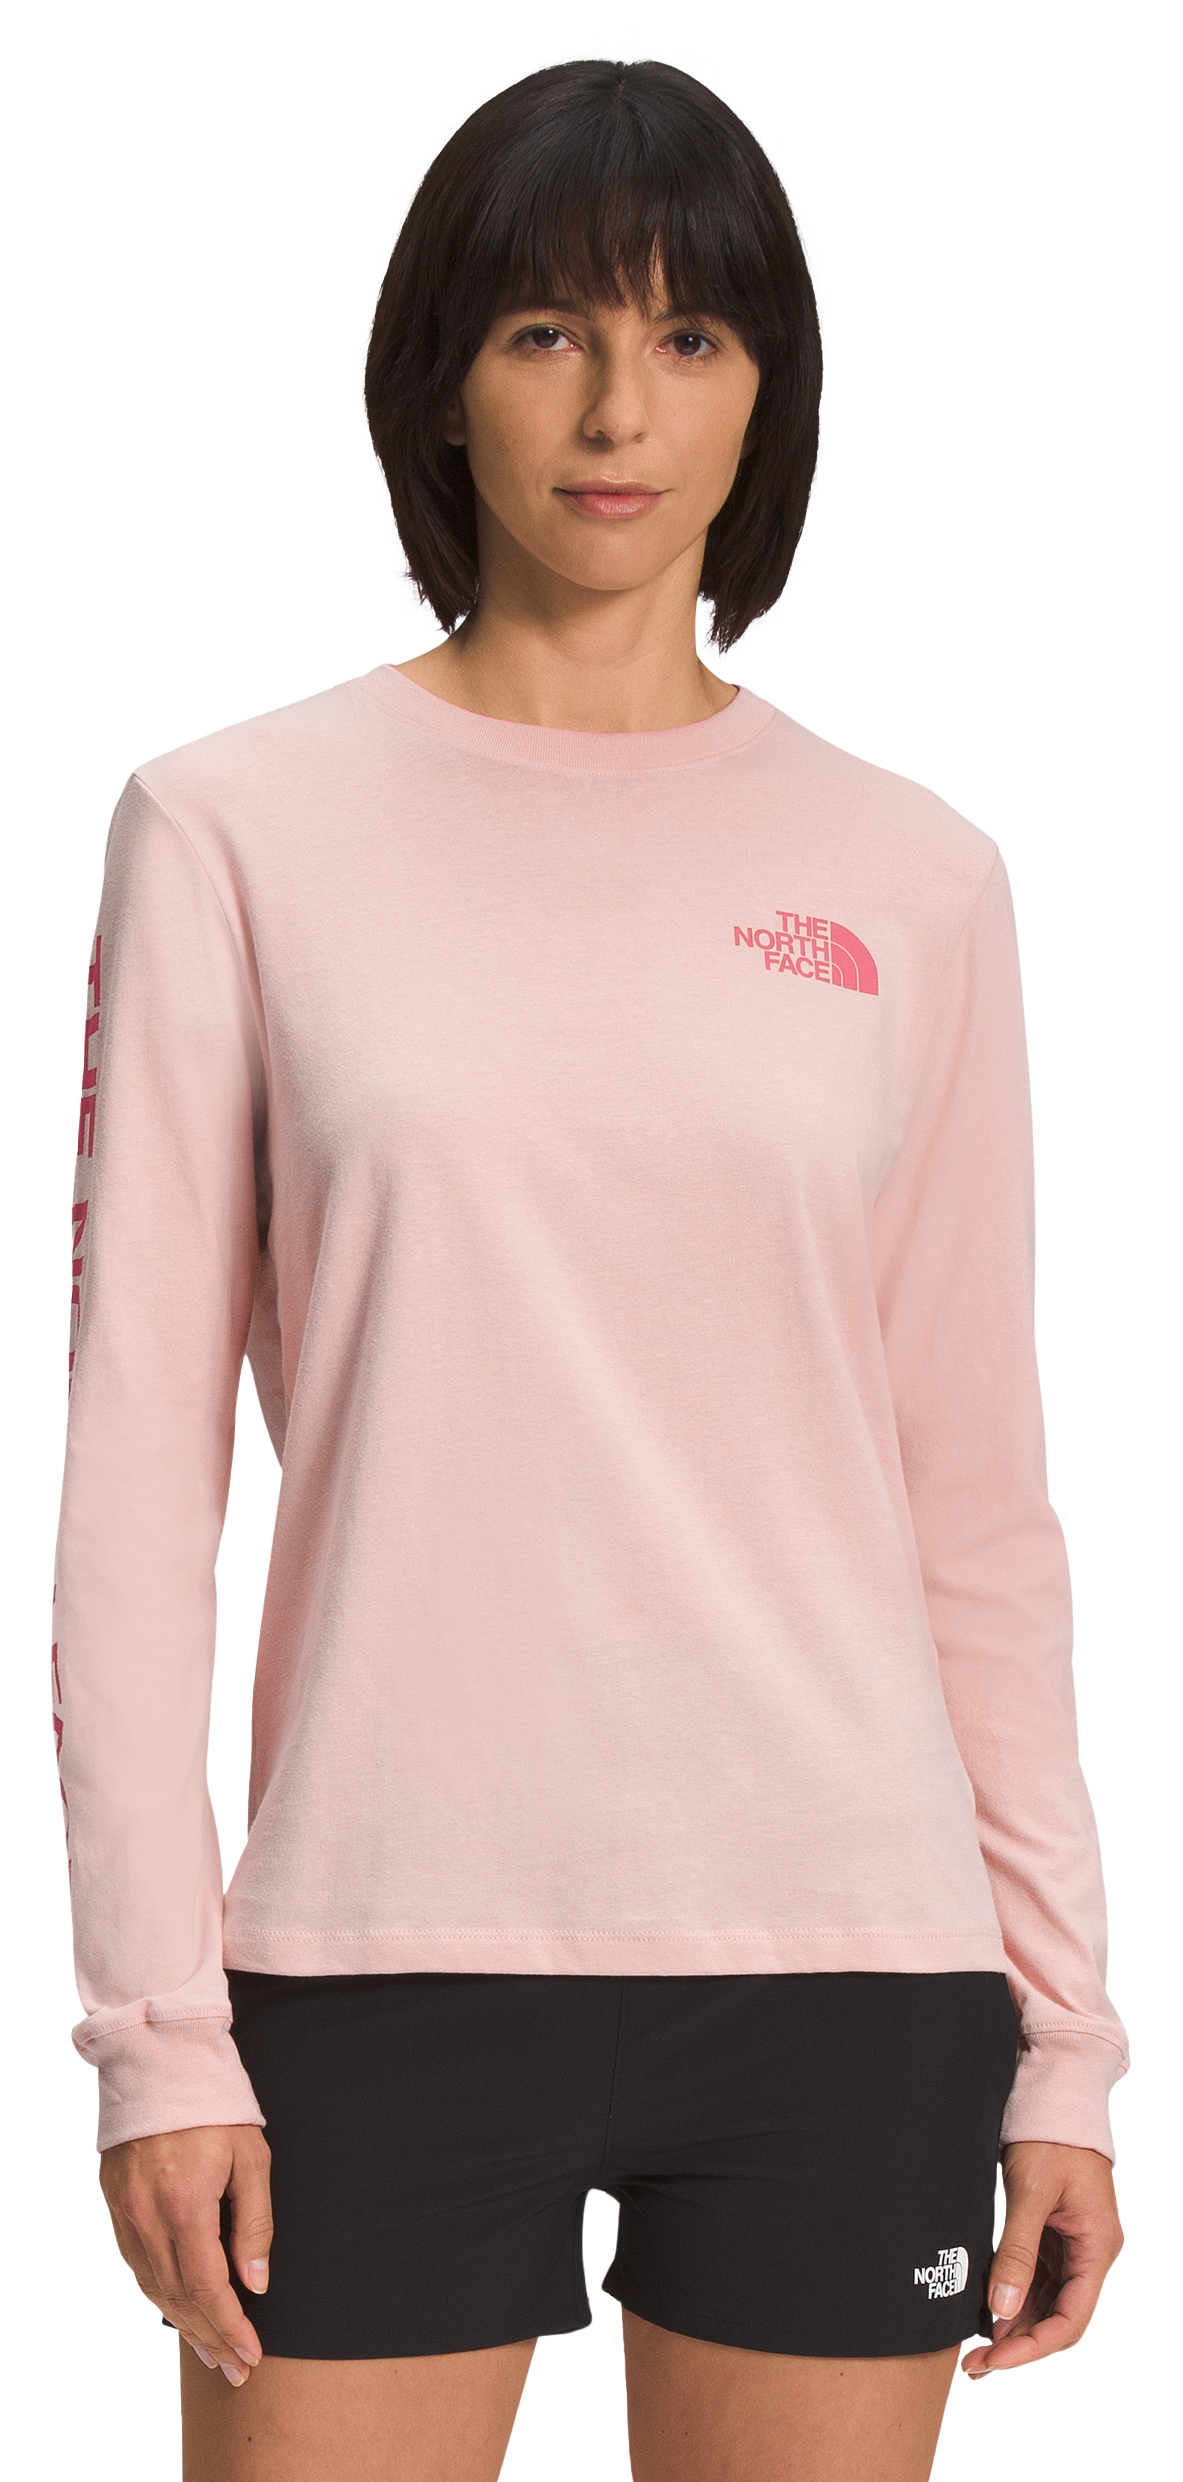 The North Face Hit Graphic Long-Sleeve T-Shirt for Ladies - Pink Moss/Cosmo Pink - L